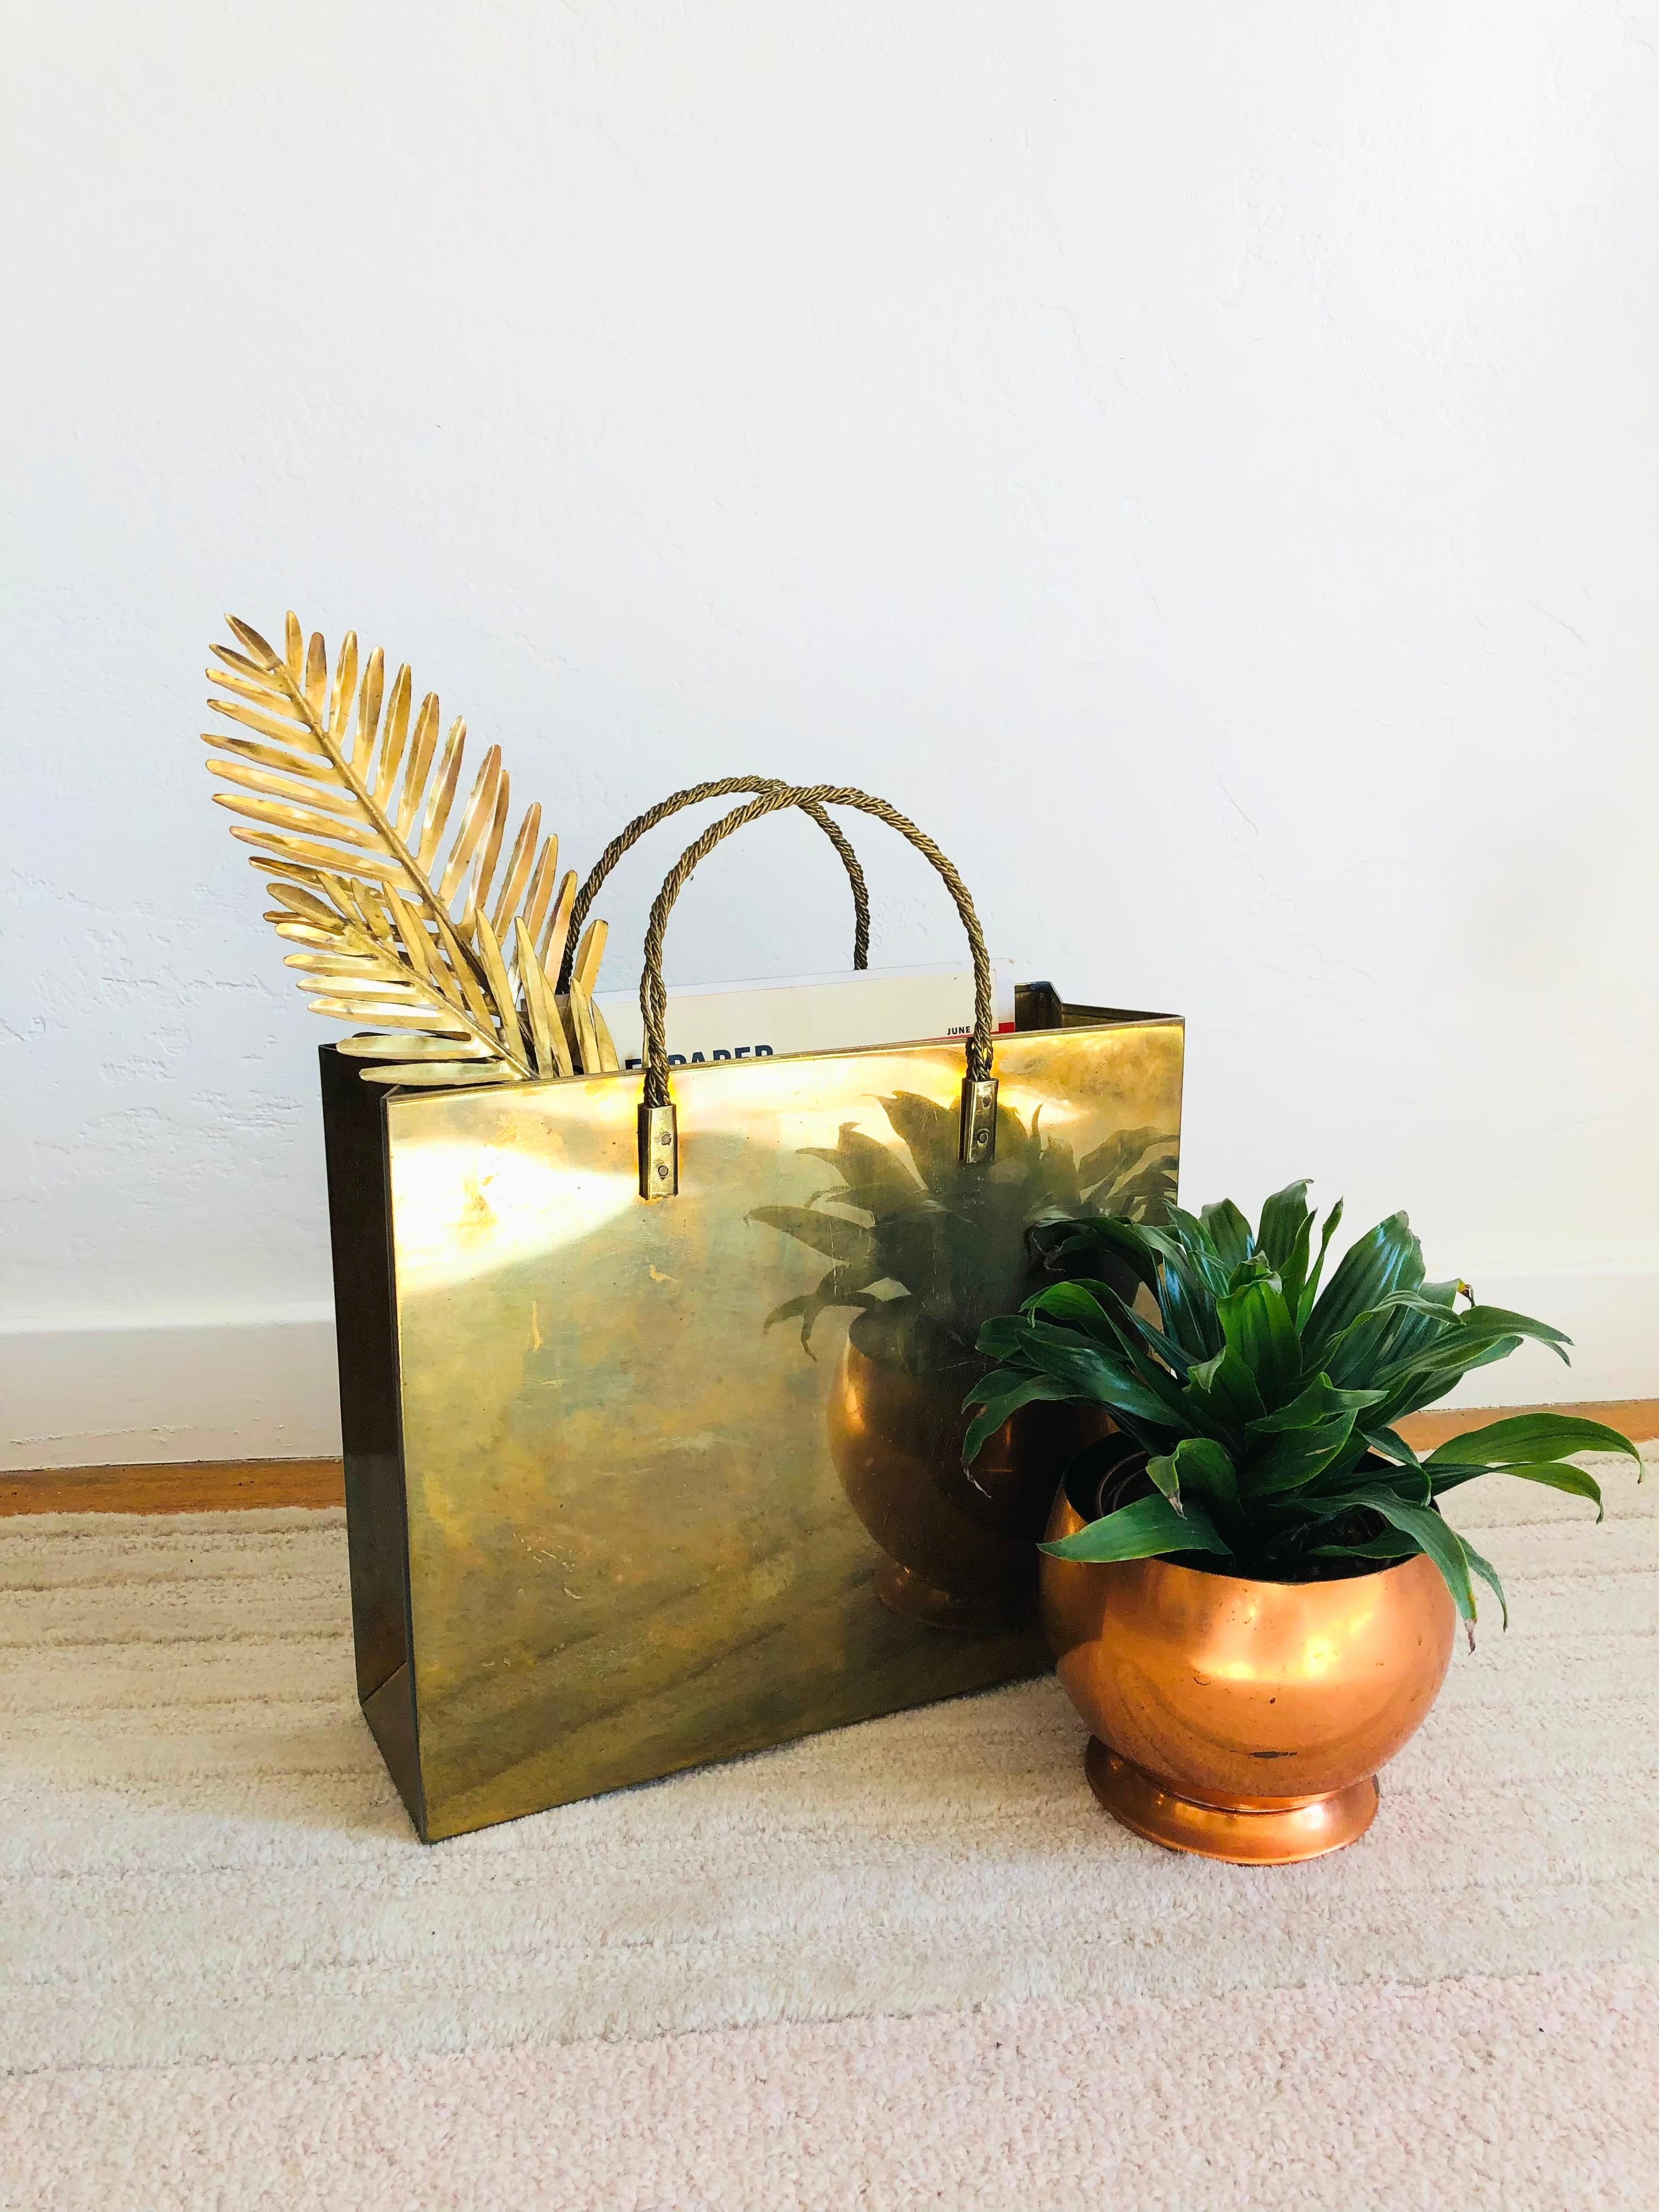 A vintage brass magazine rack, designed in the shape of shopping bag attributed to Italian designer, Gio Ponti. Nice rigid shape with stiff woven brass handles at the top with a slim profile and small footprint. Perfect for using as magazine or file